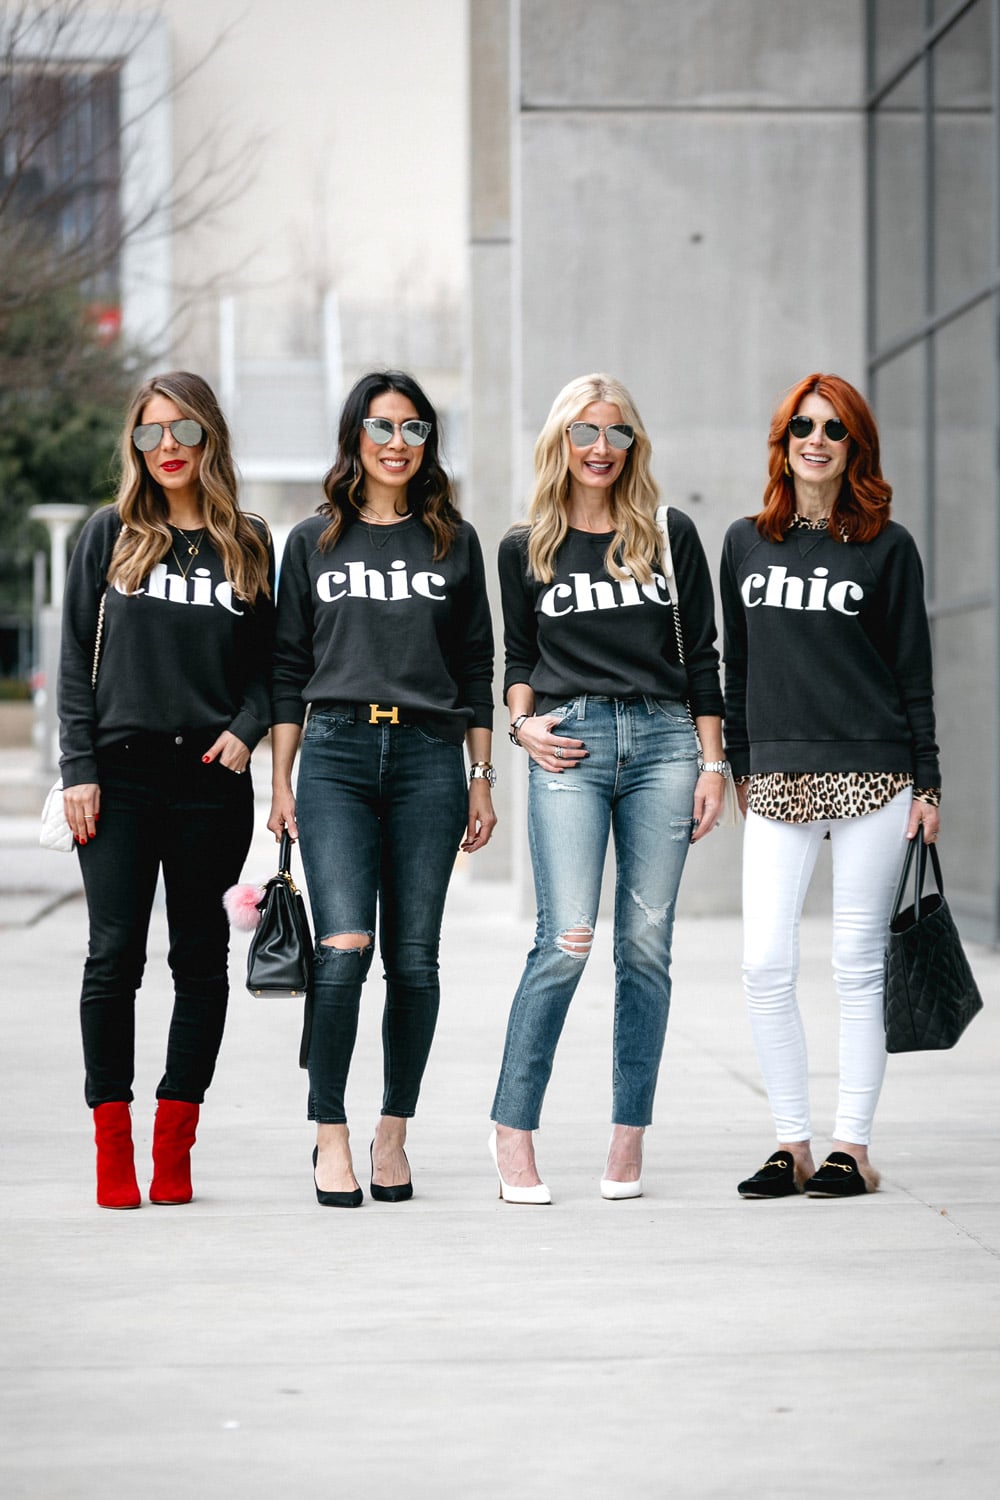 style at any age, how to look chic in a sweatshirt